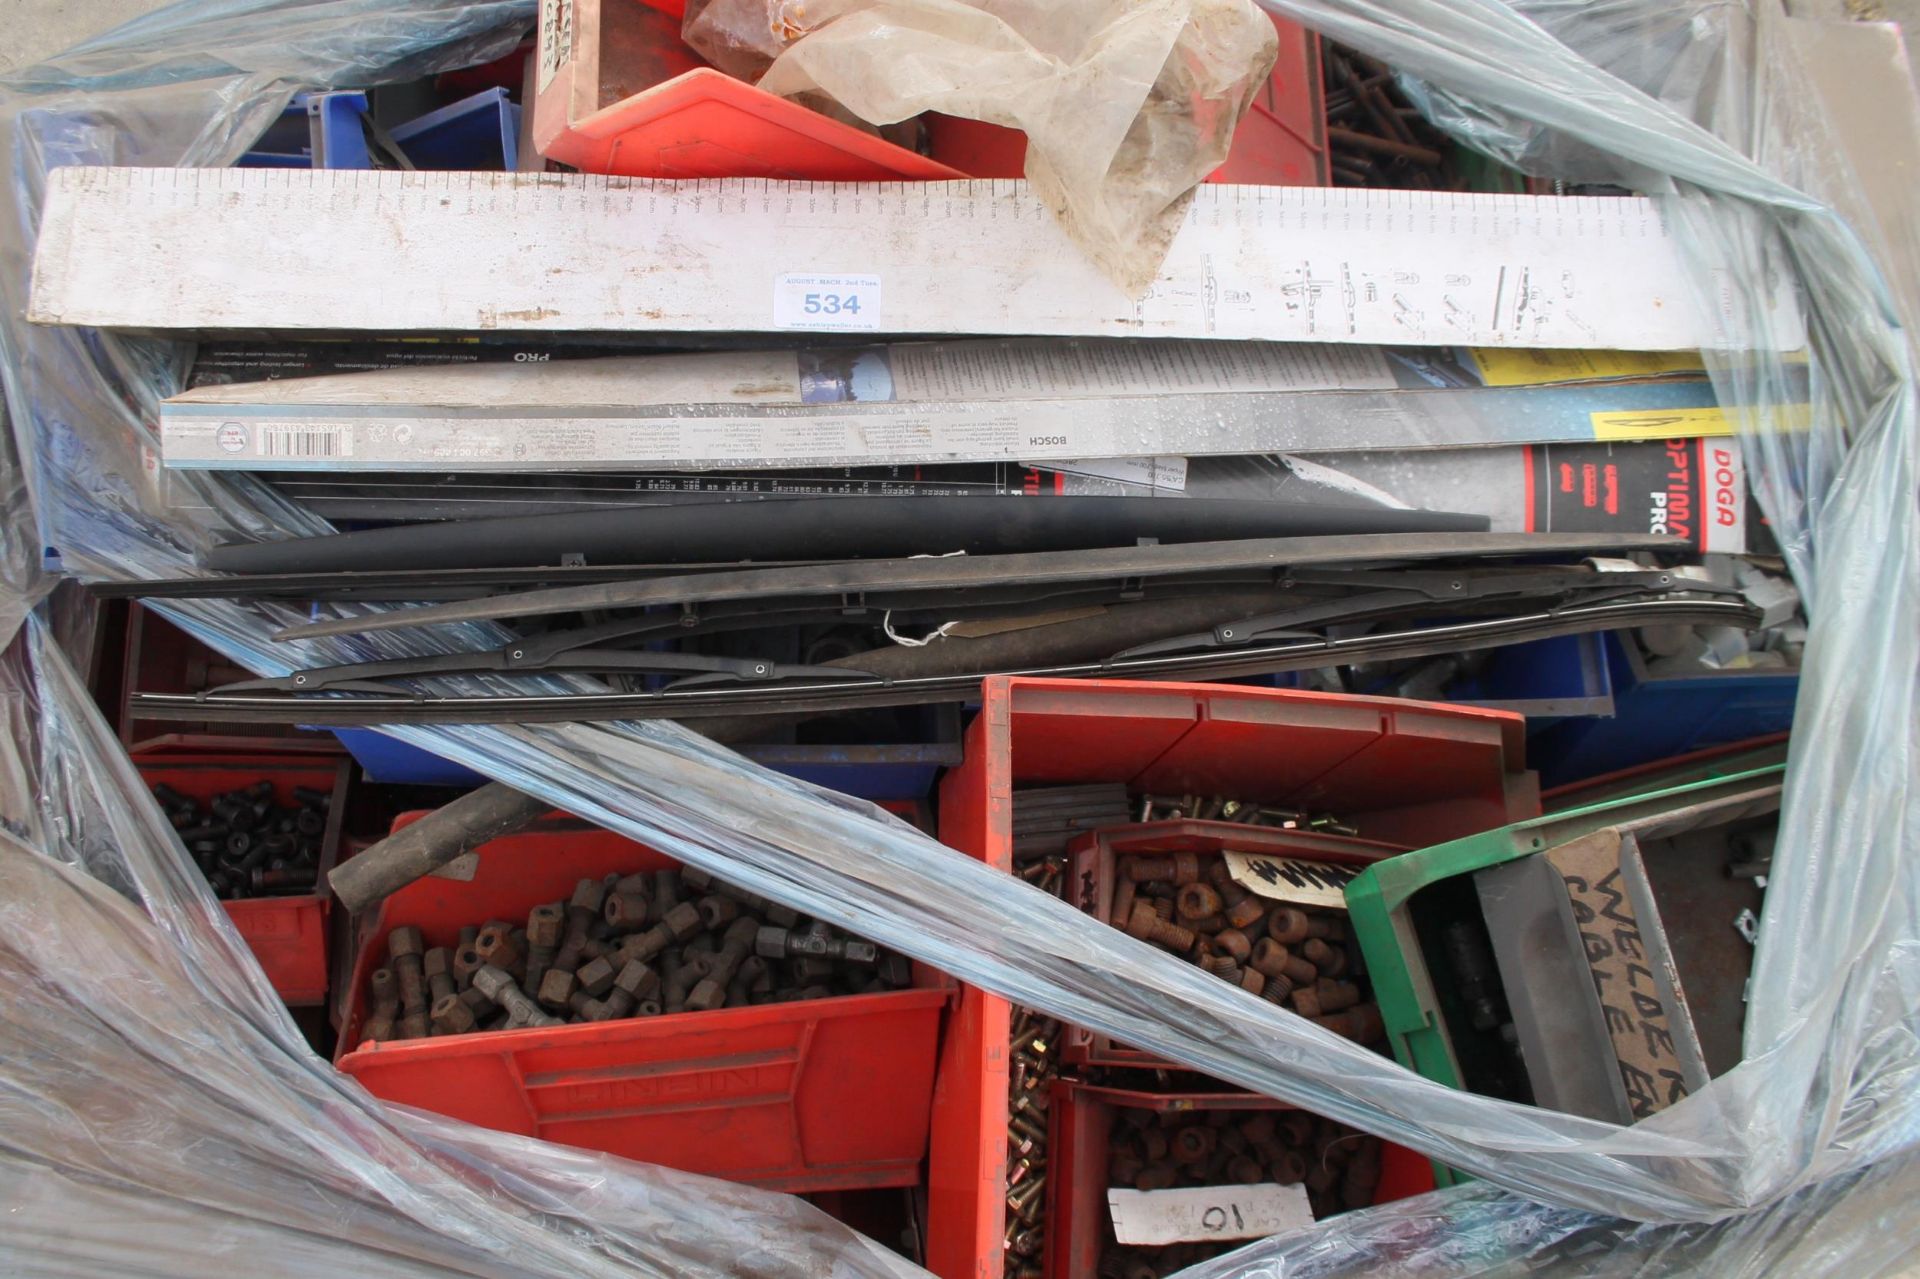 A PALLET FULL OF PLASTIC LIN BINS ALL COMPLETE WITH NUTS , BOLTS AND FURTHER HARDWARE - Image 2 of 2